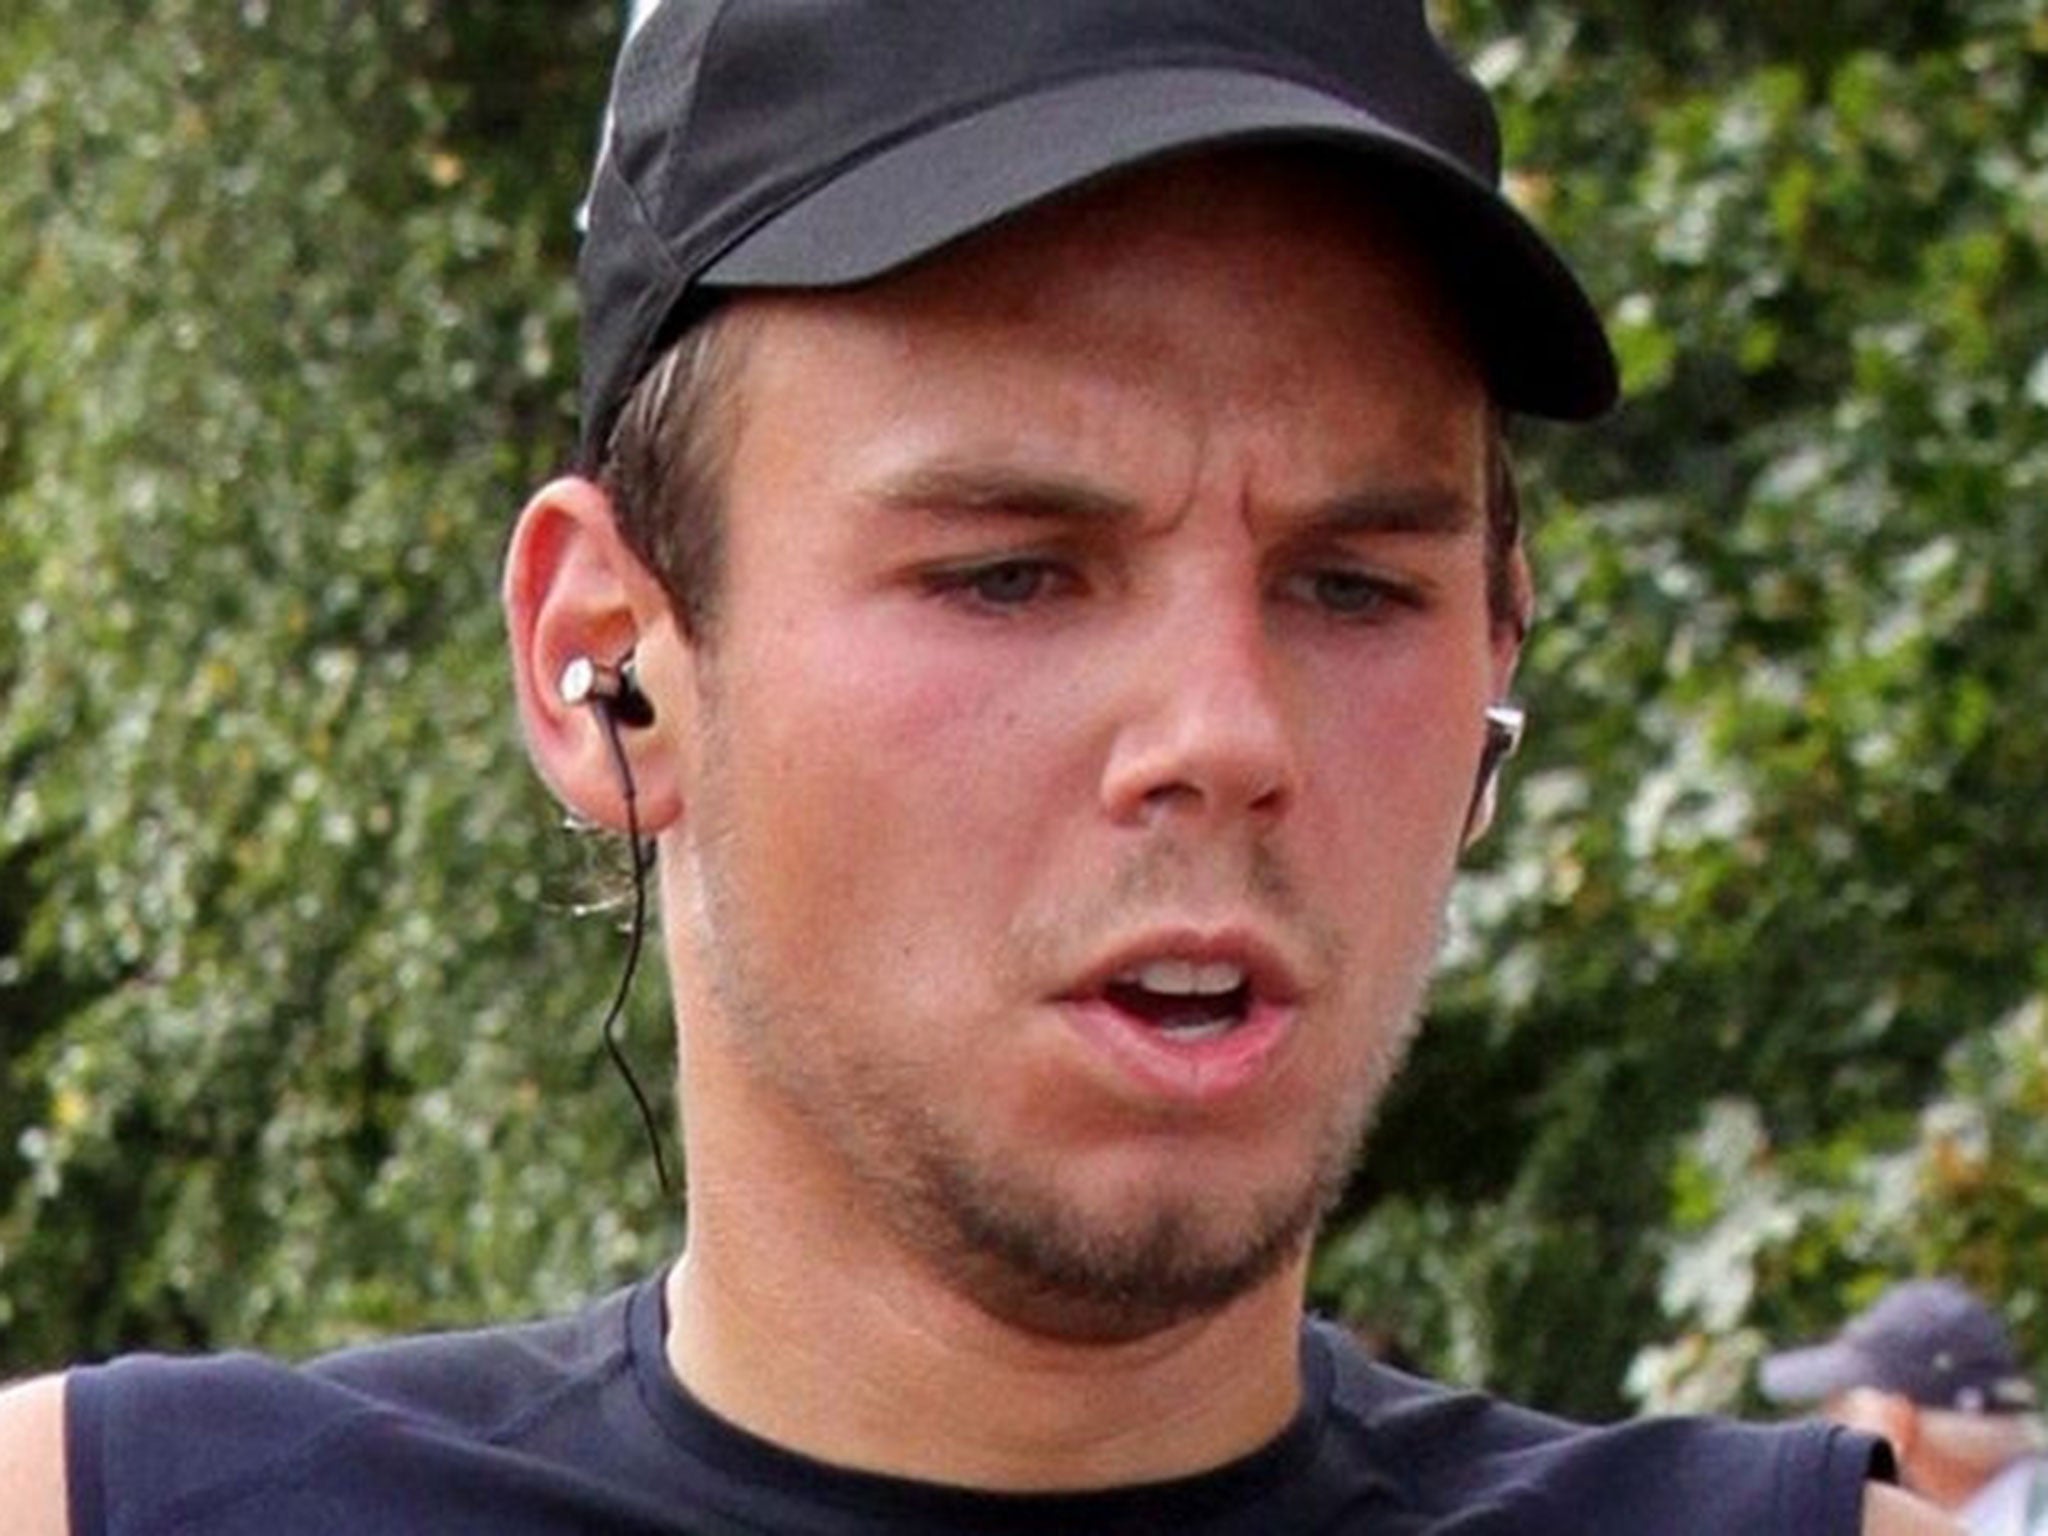 Lufthansa reportedly knew about a depressive episode Andreas Lubitz suffered.